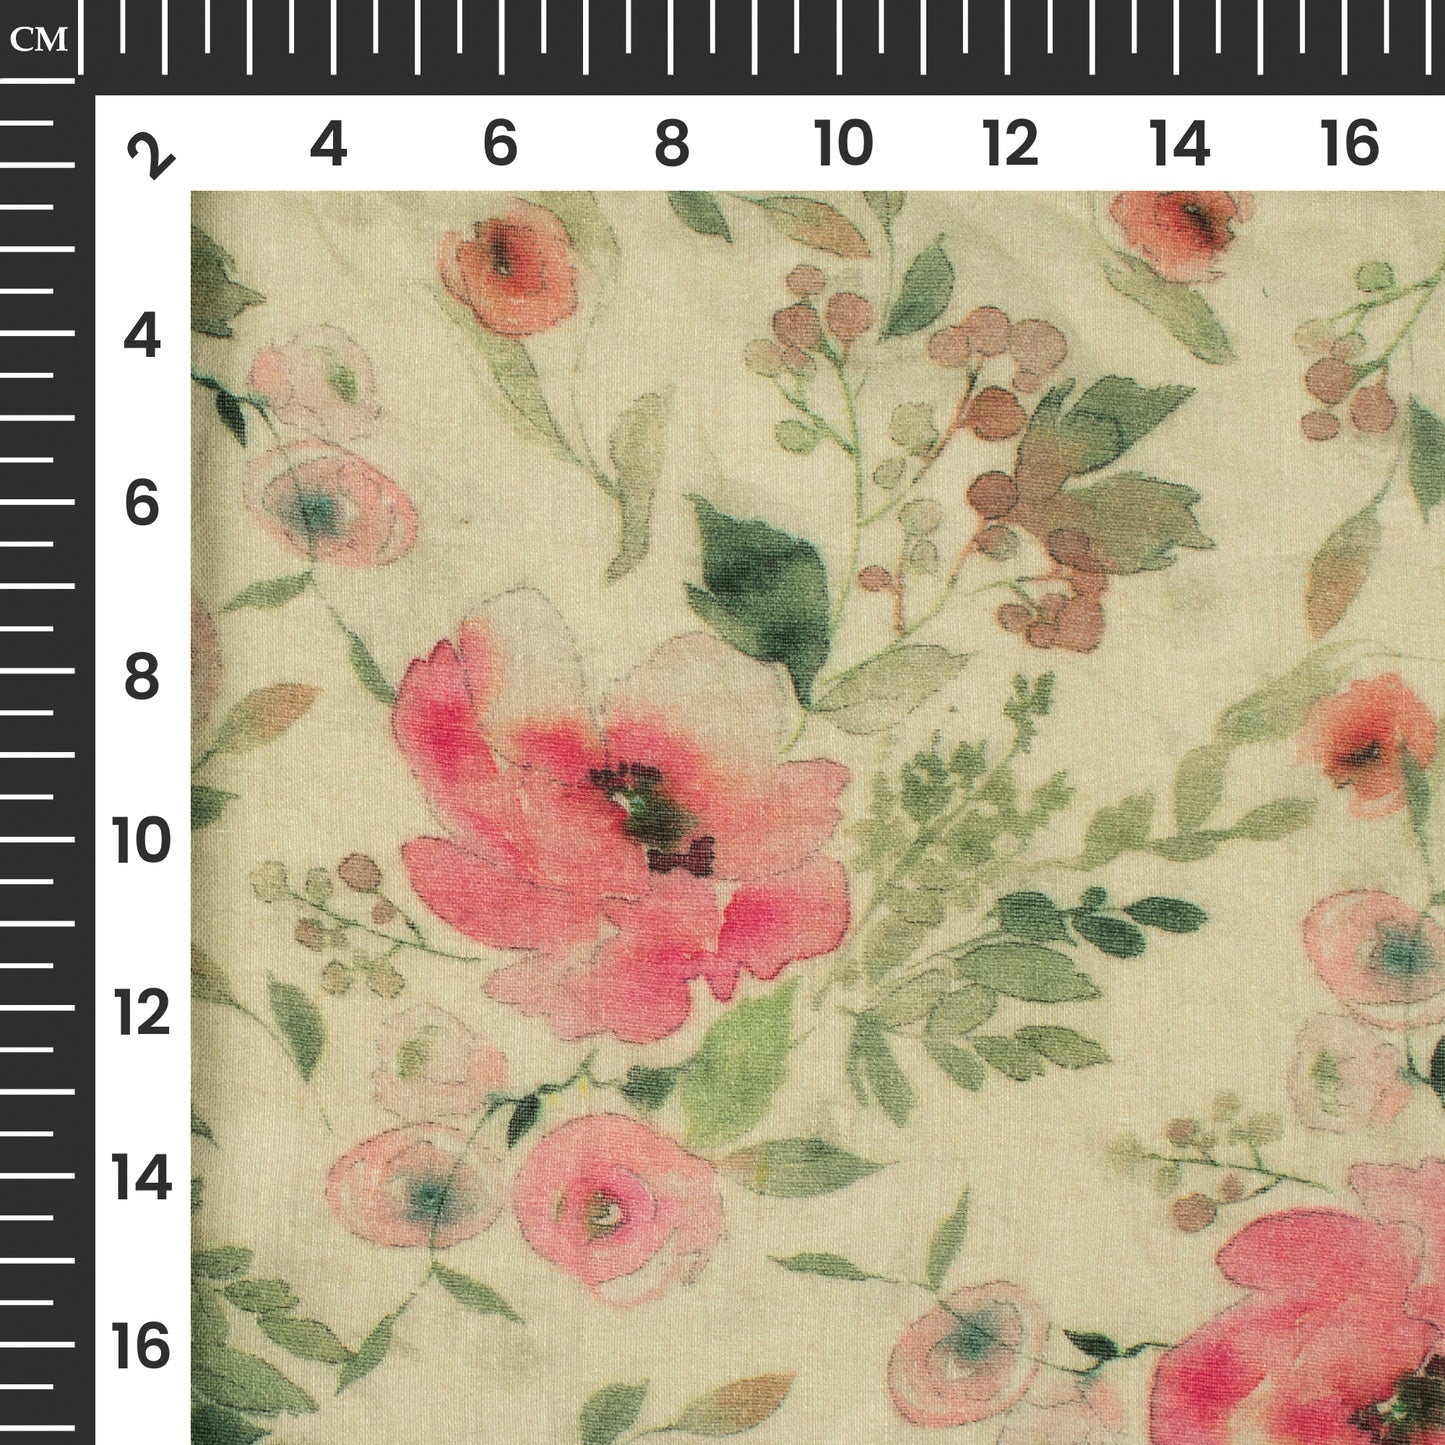 Rose Pink And Cream Floral Digital Print Pure Cotton Mulmul Fabric